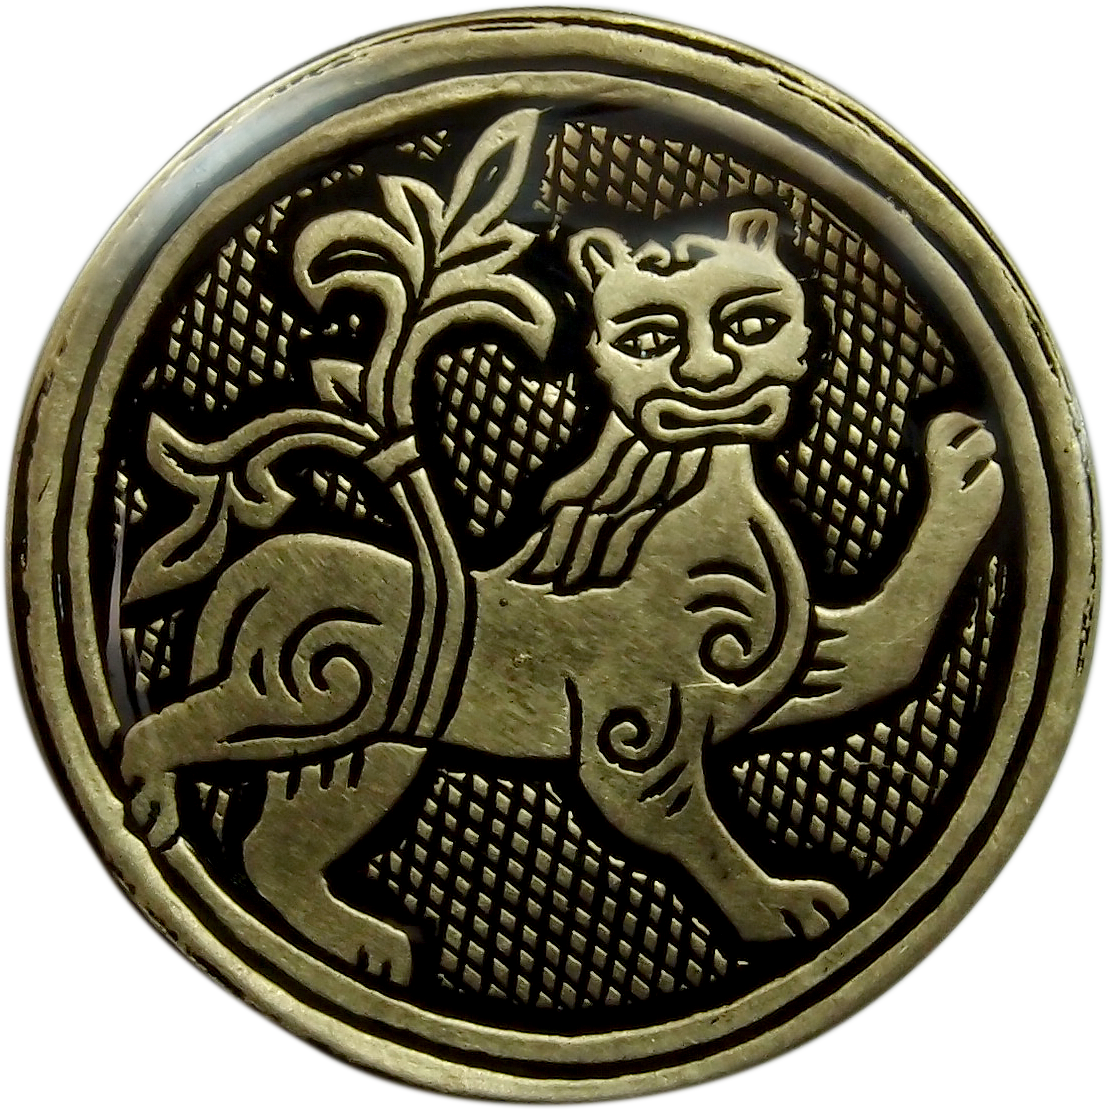 Magnet "Lion with a flourishing tail"